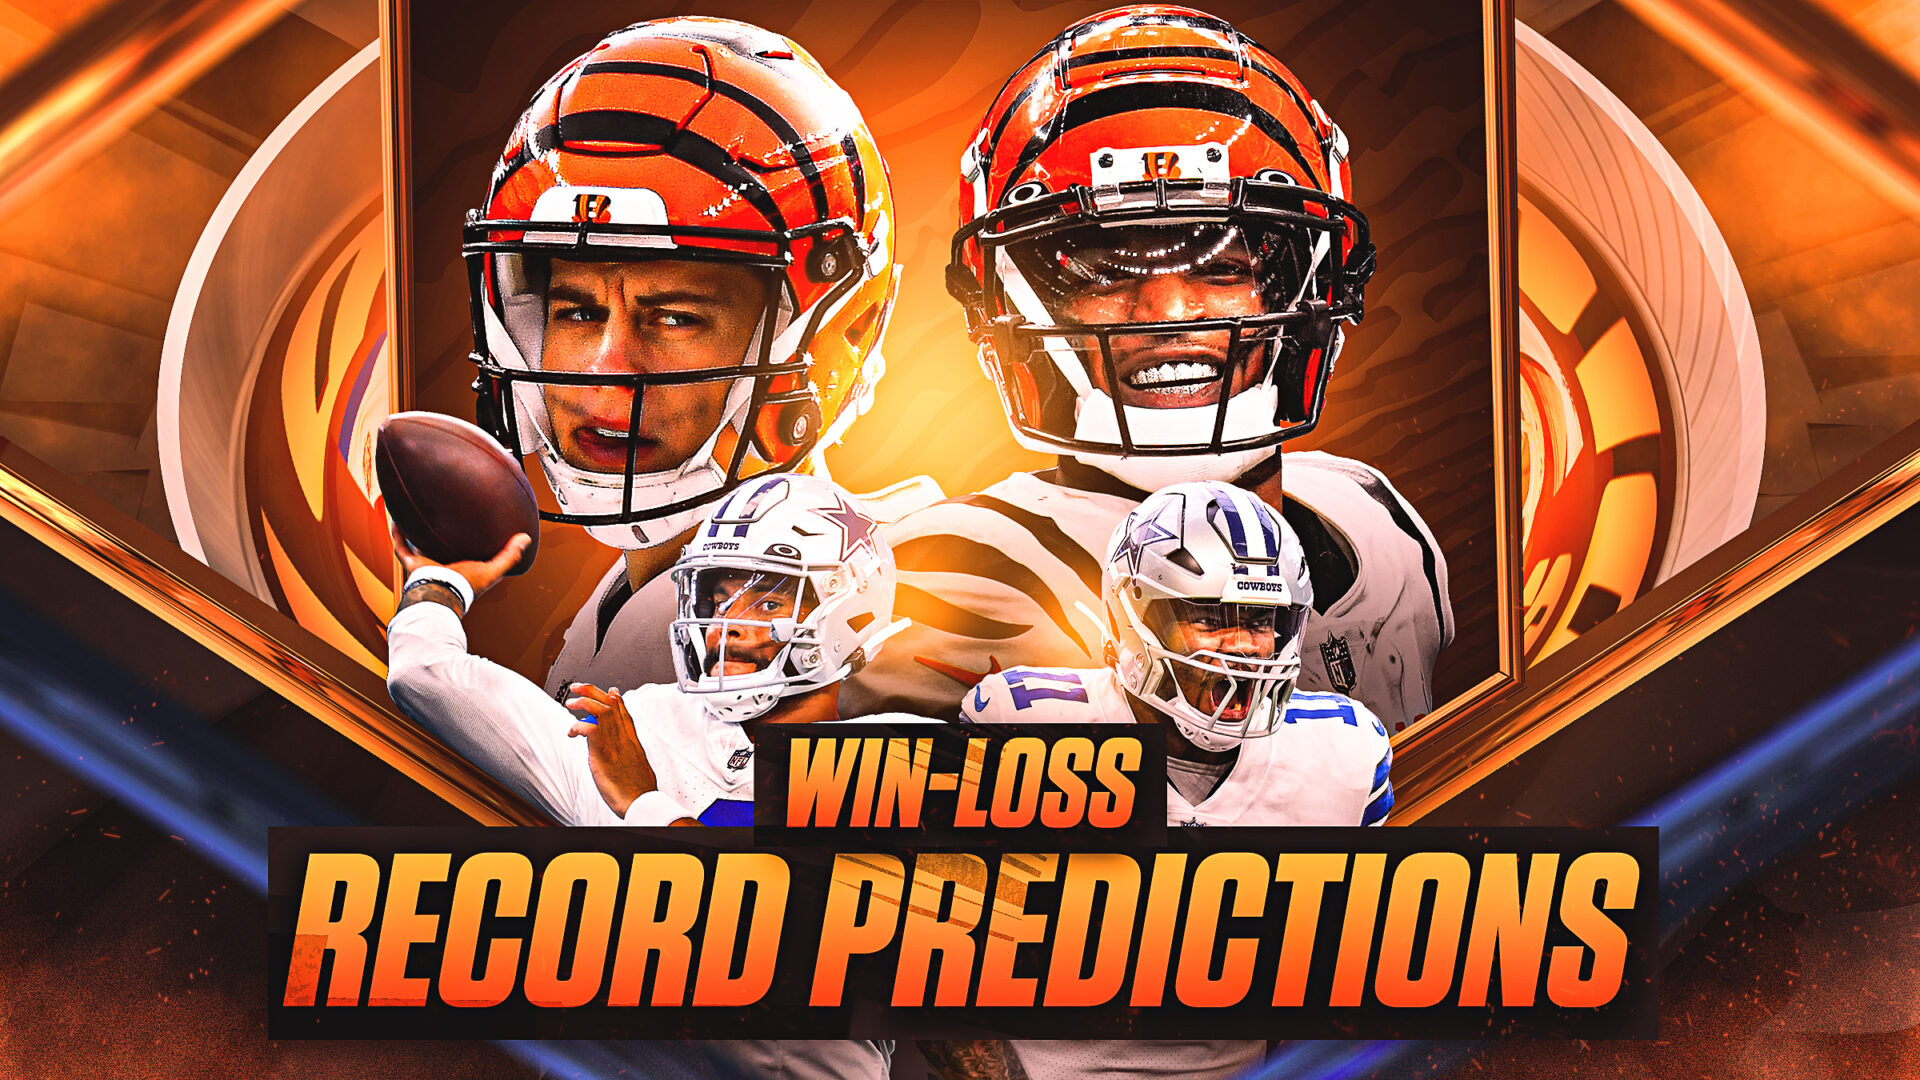 A graphic that reads "Win-Loss Record Predictions" and features two Cincinnati Bengals players above two Dallas Cowboys